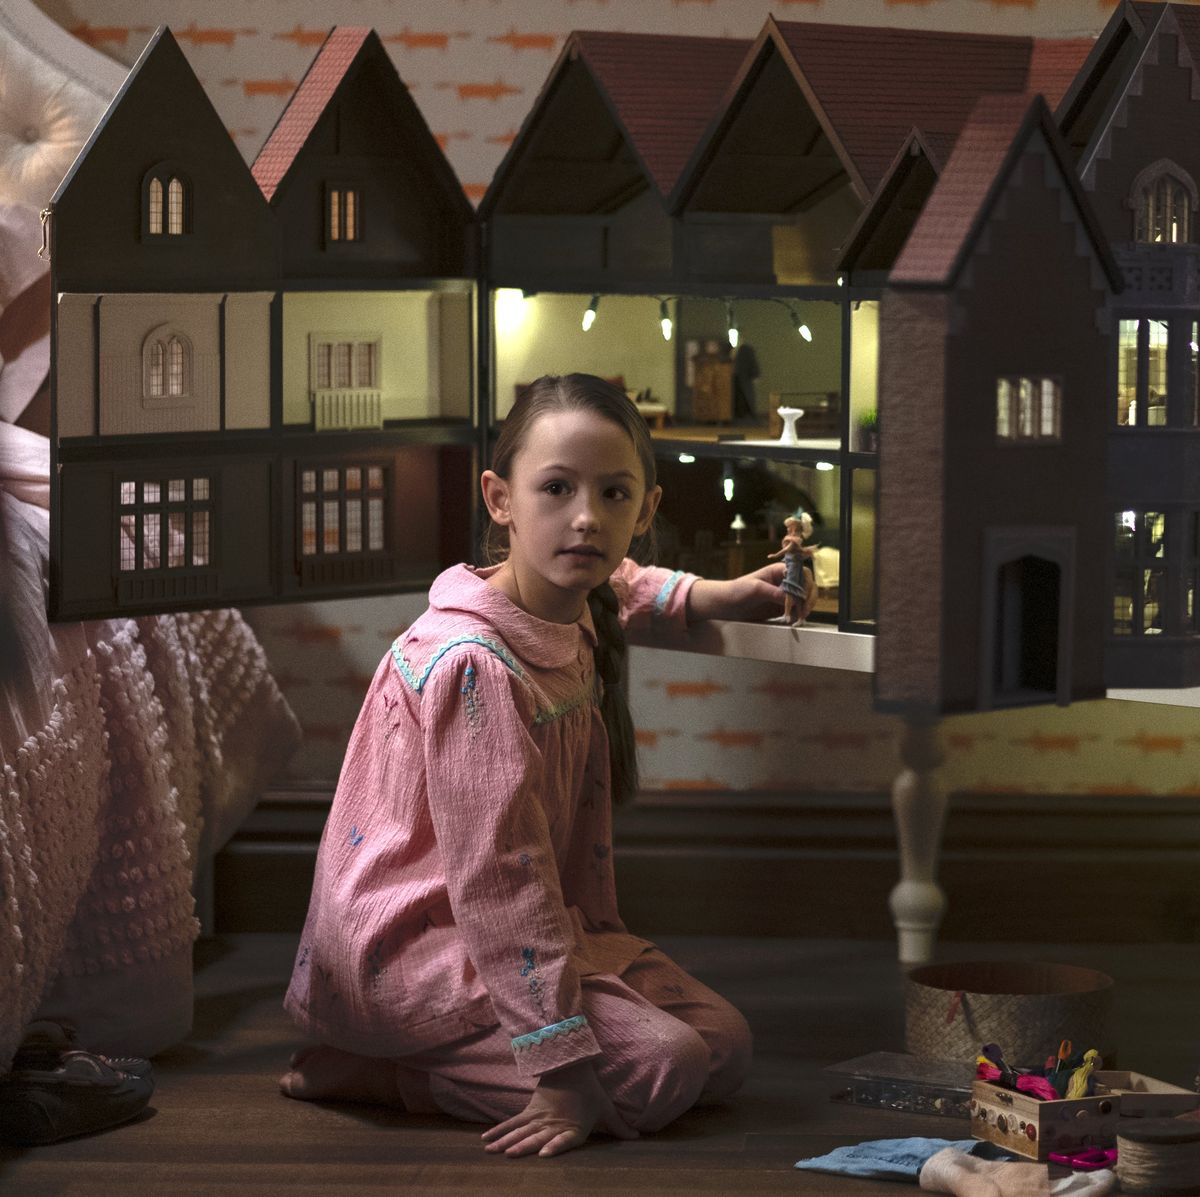 Haunting of Bly Manor boss explains dollhouse and hidden ghosts